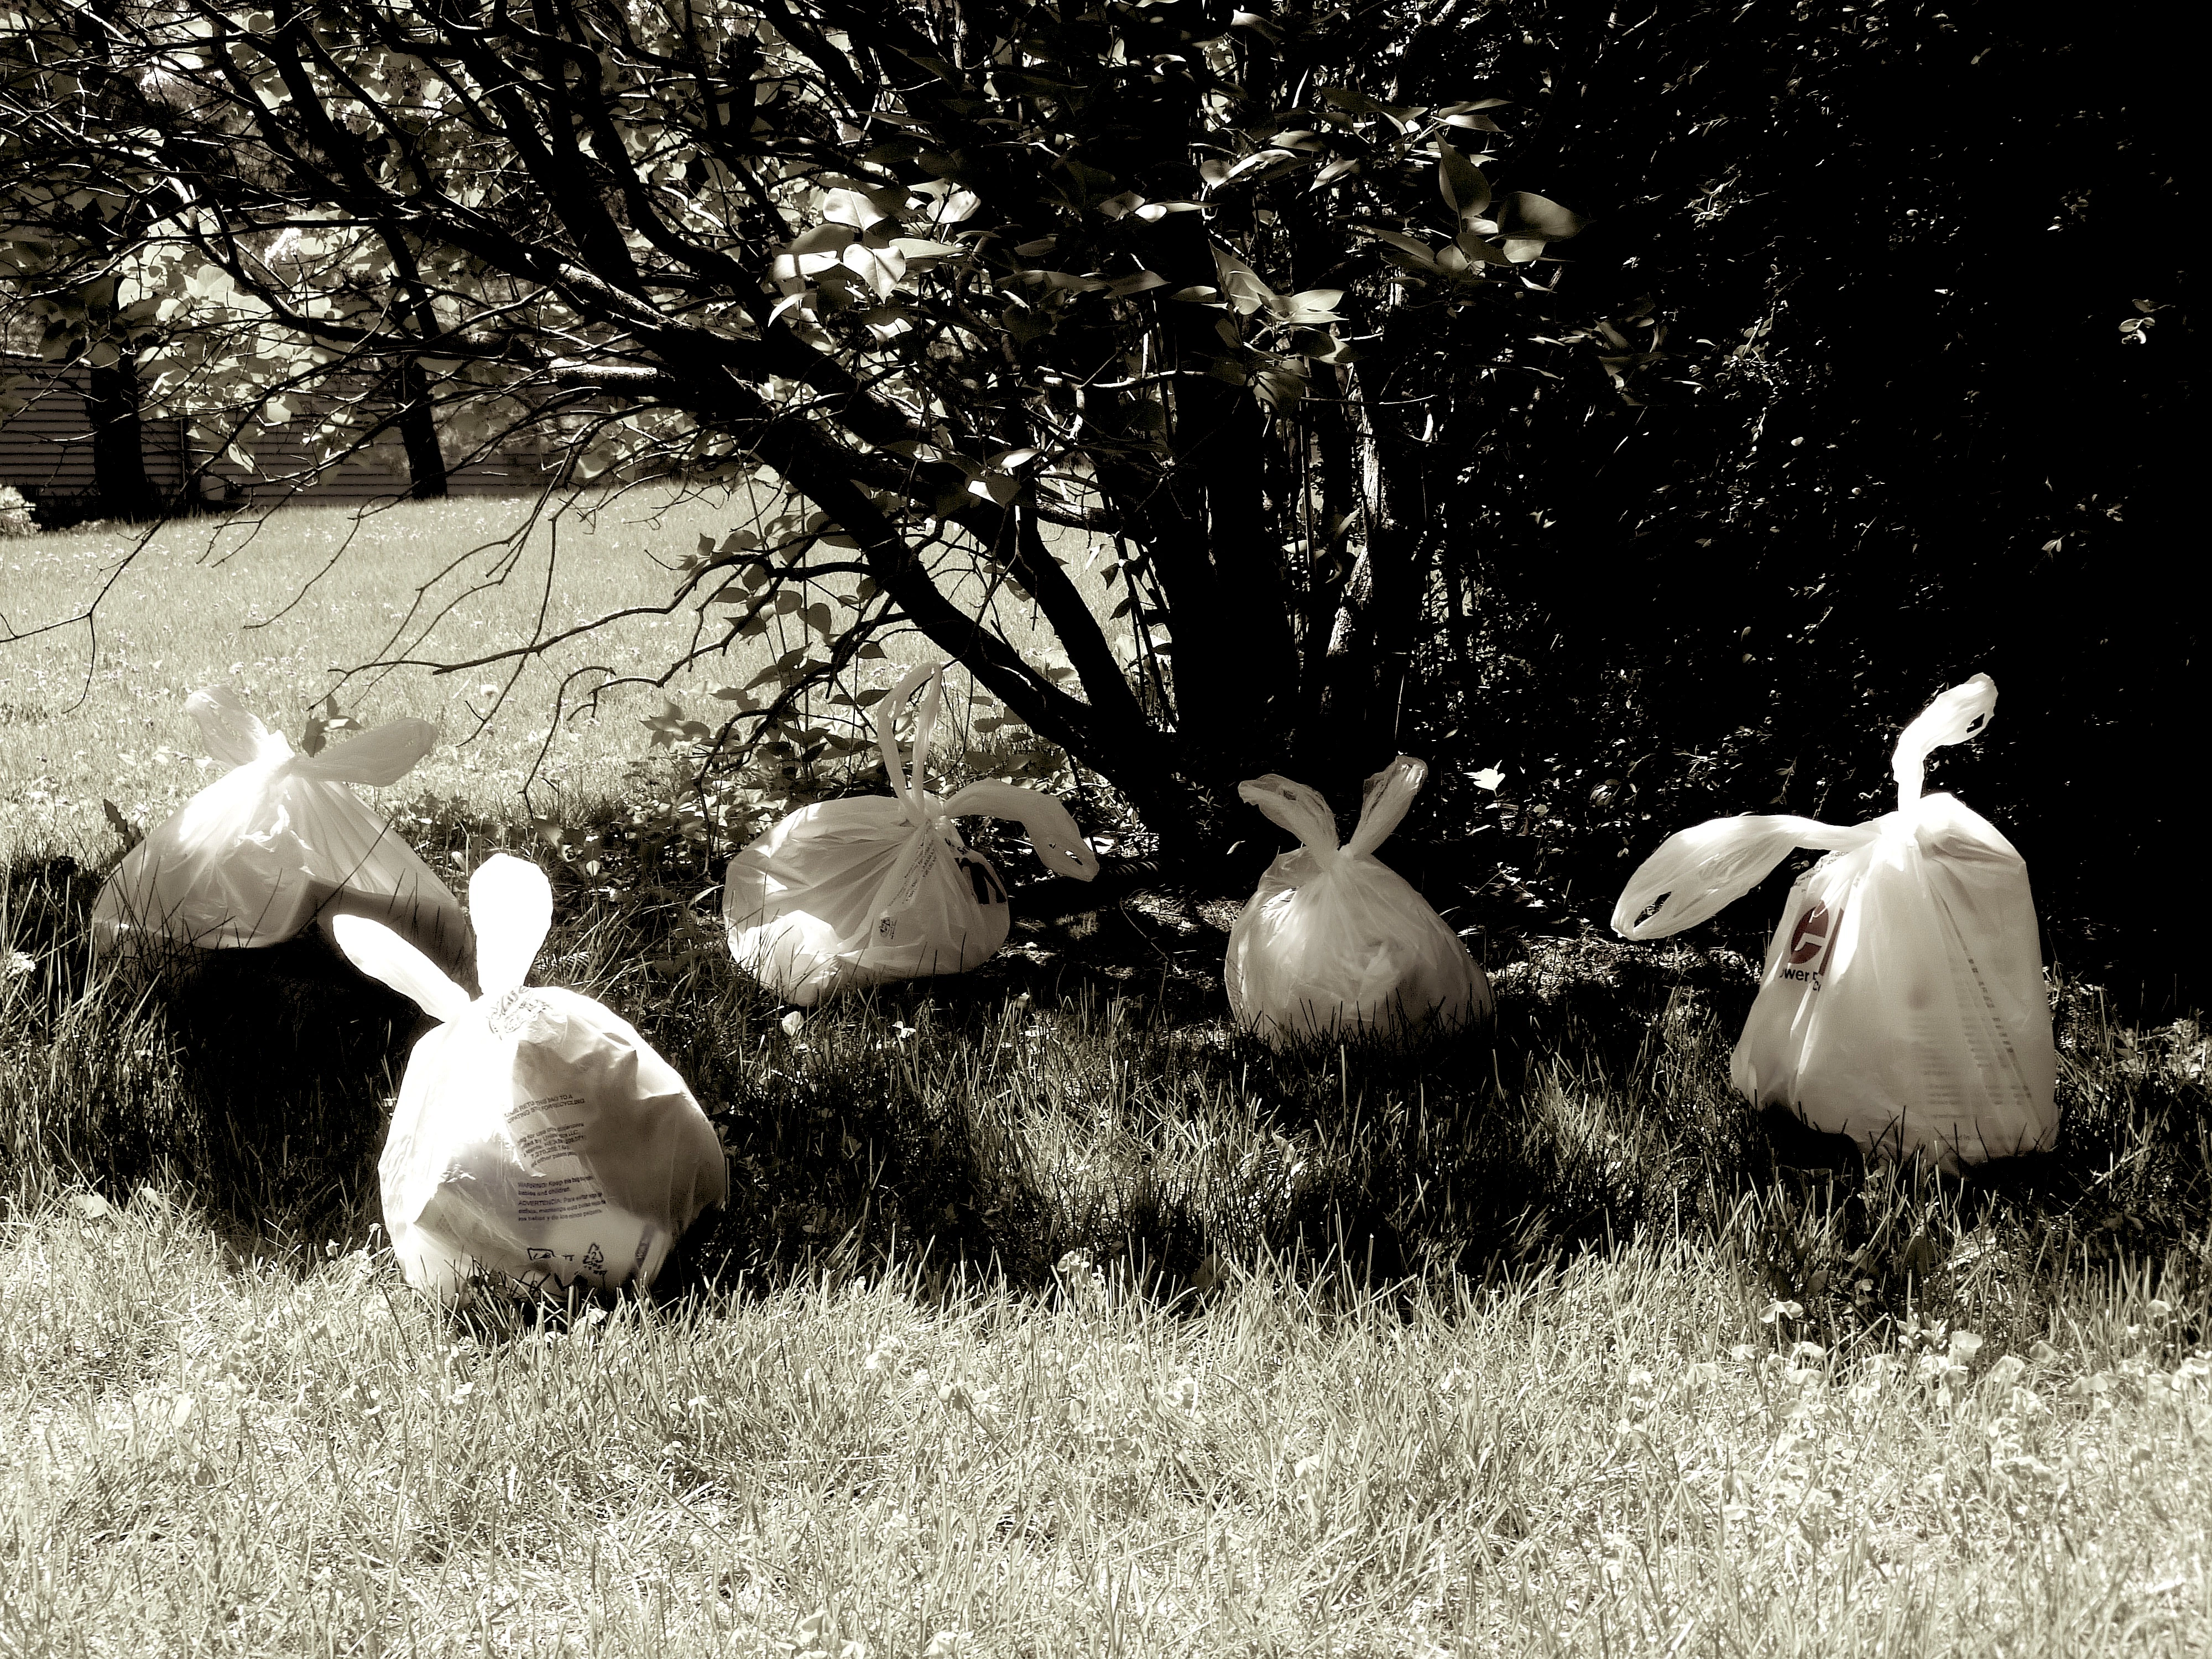 "Five Bunnies Holding a Meeting Under a Shade of Diluted Green"